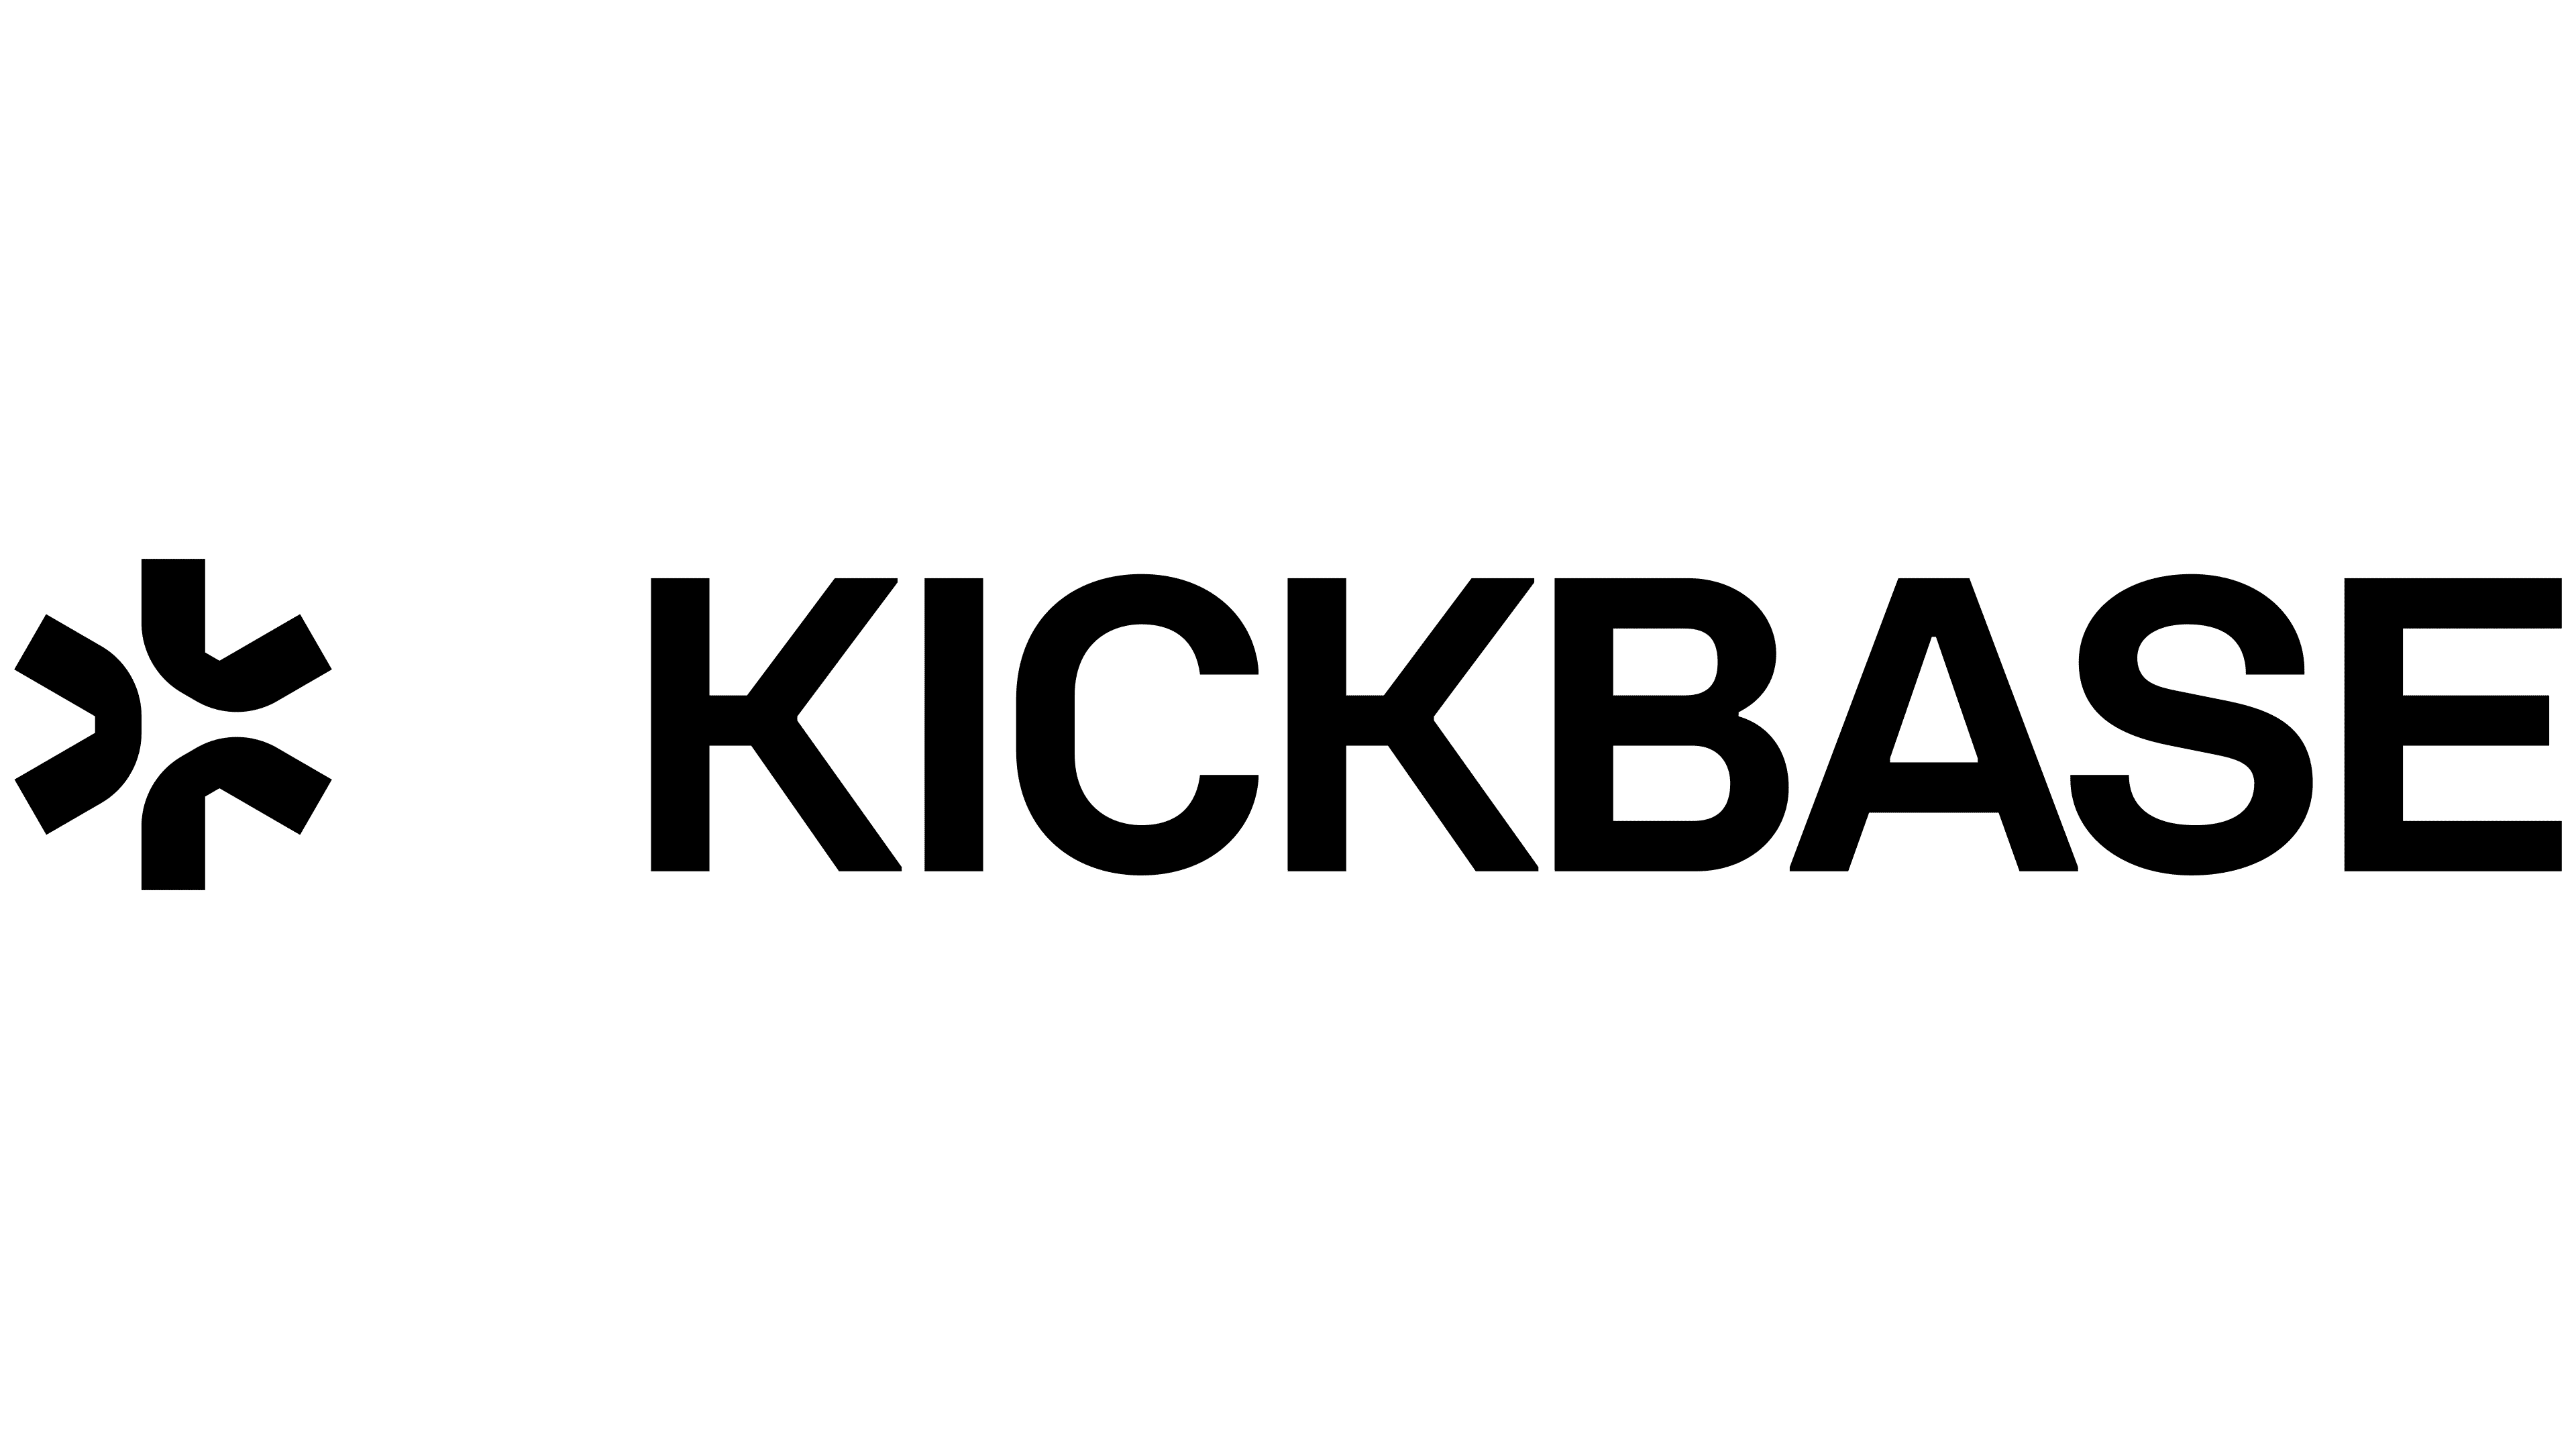 Kickbase's New Identity: Merging Football Passion with Modern Design